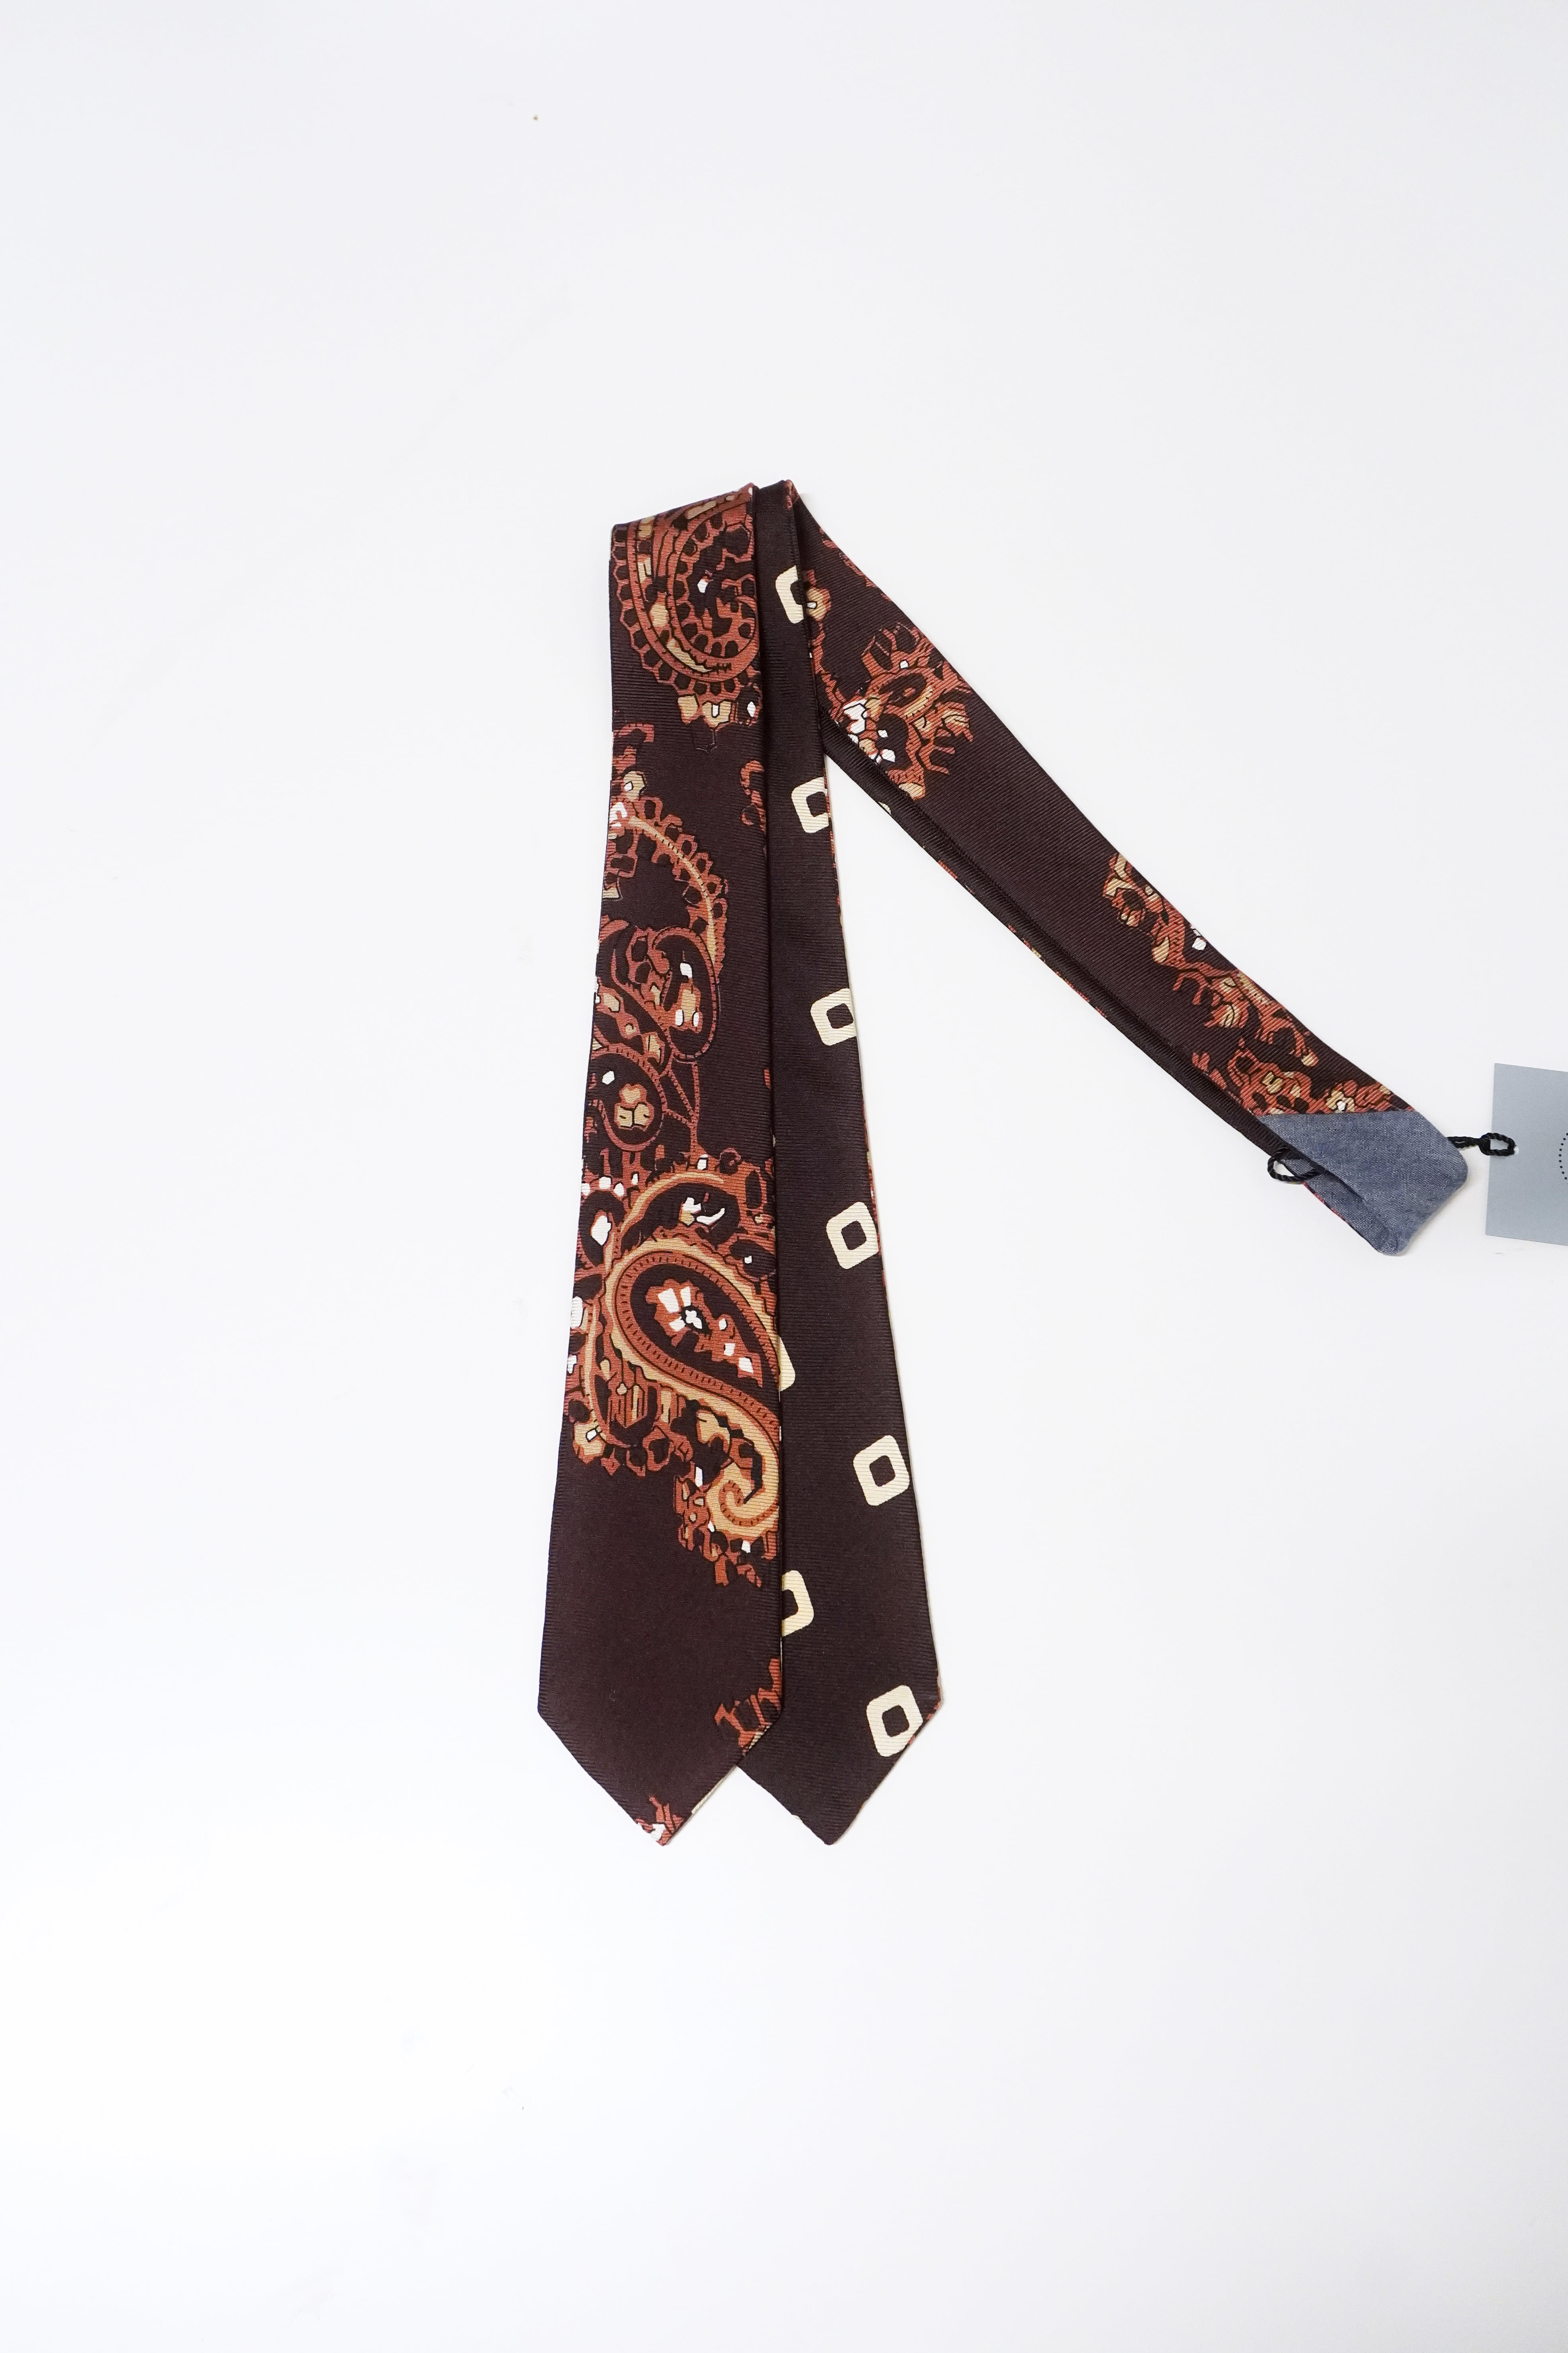 [KENNETH FIELD] 2 Face Tie Paisley/Small Print –Brown